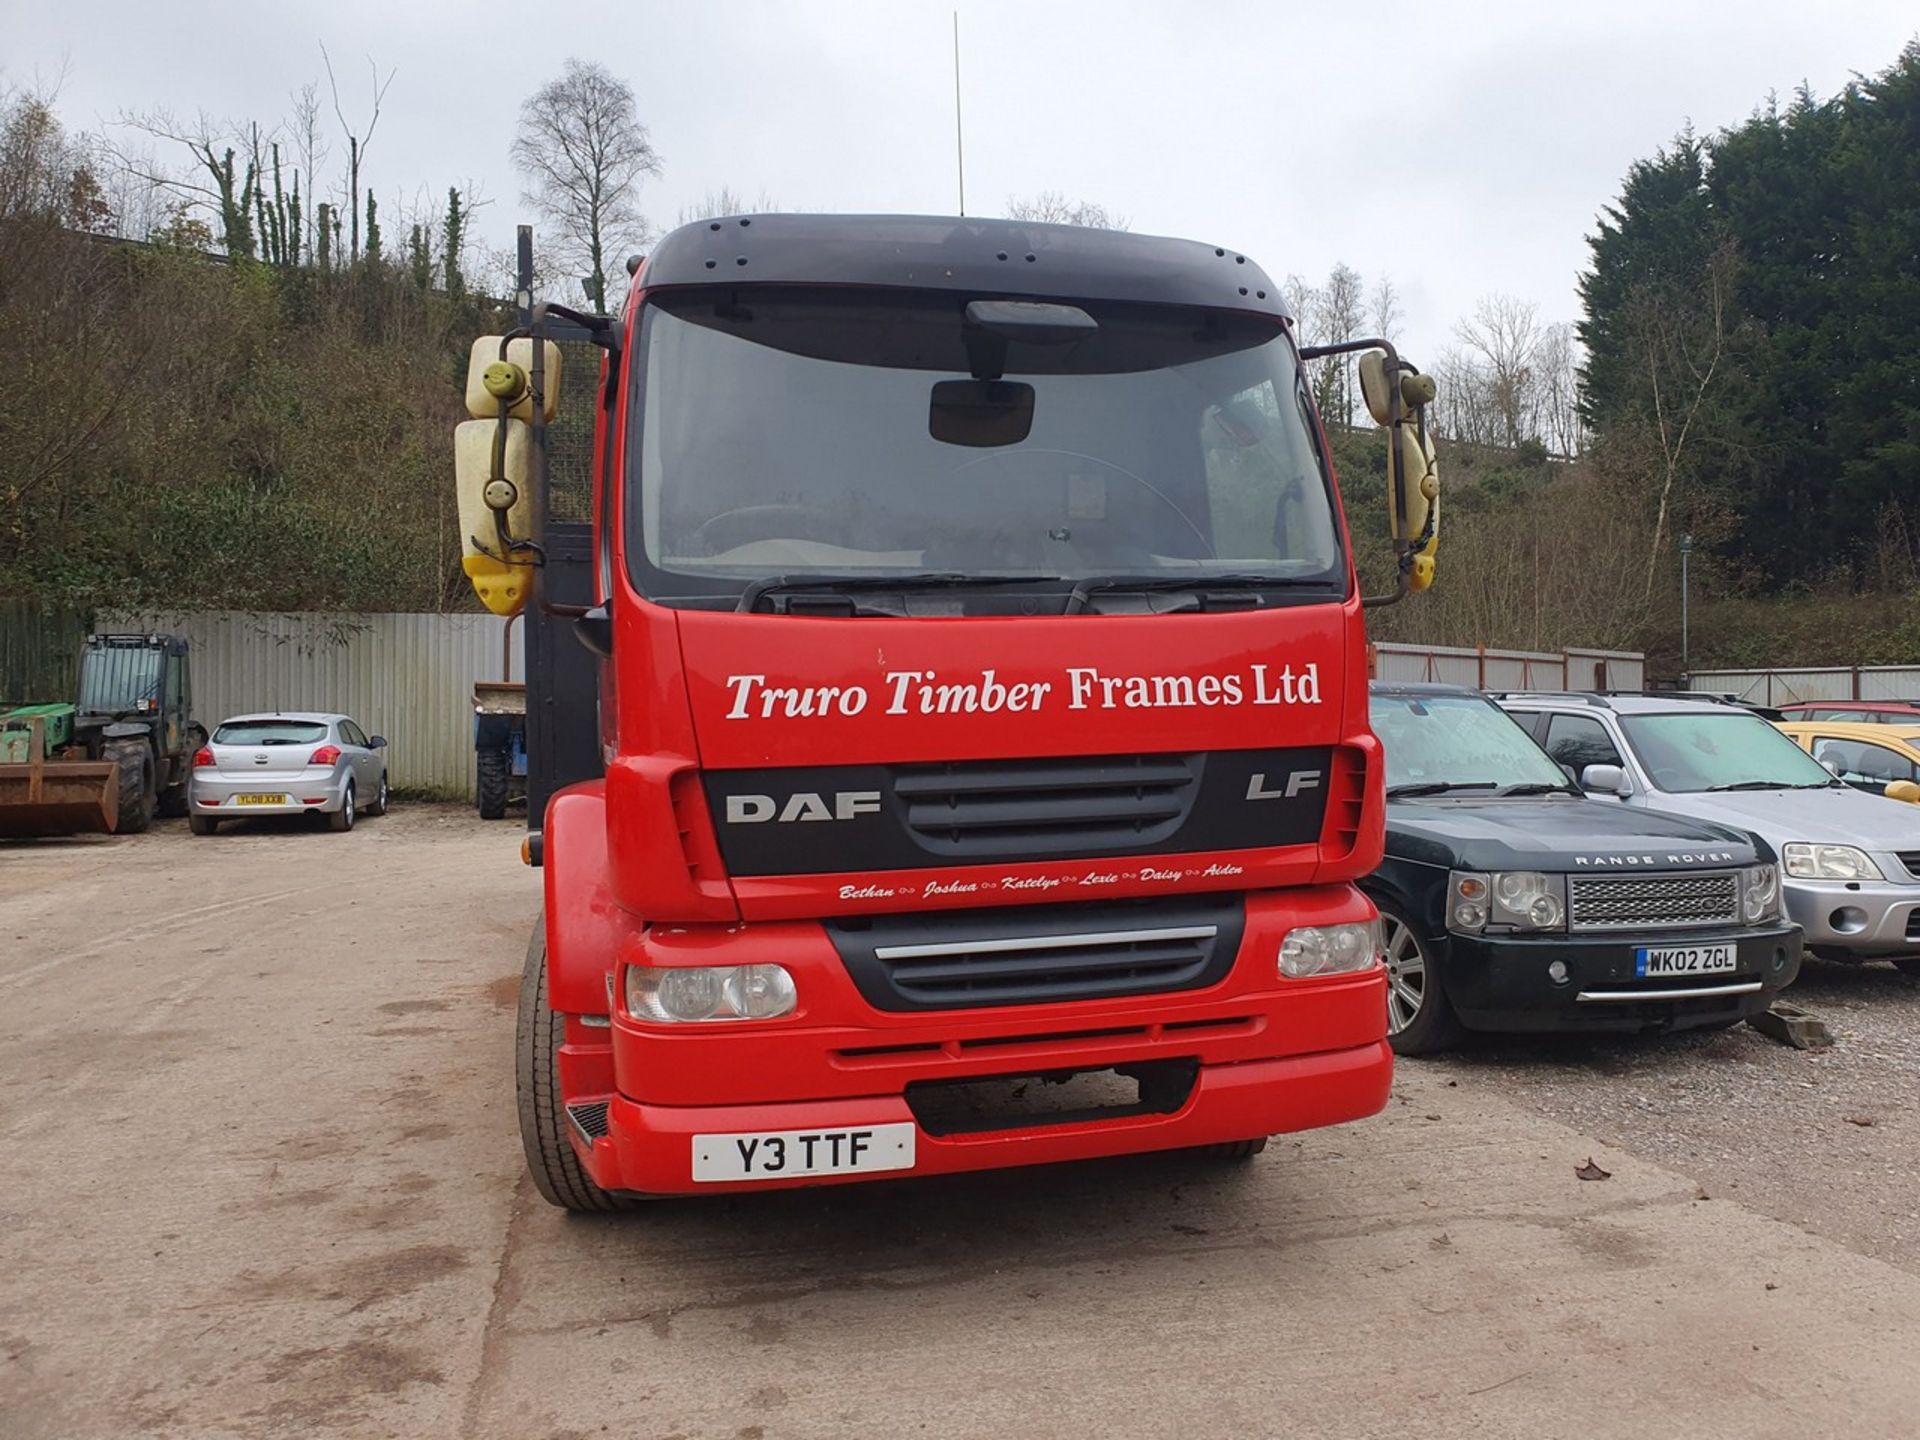 13/13 DAF TRUCKS FLAT BED - 6693cc 2dr (Red) - Image 15 of 23